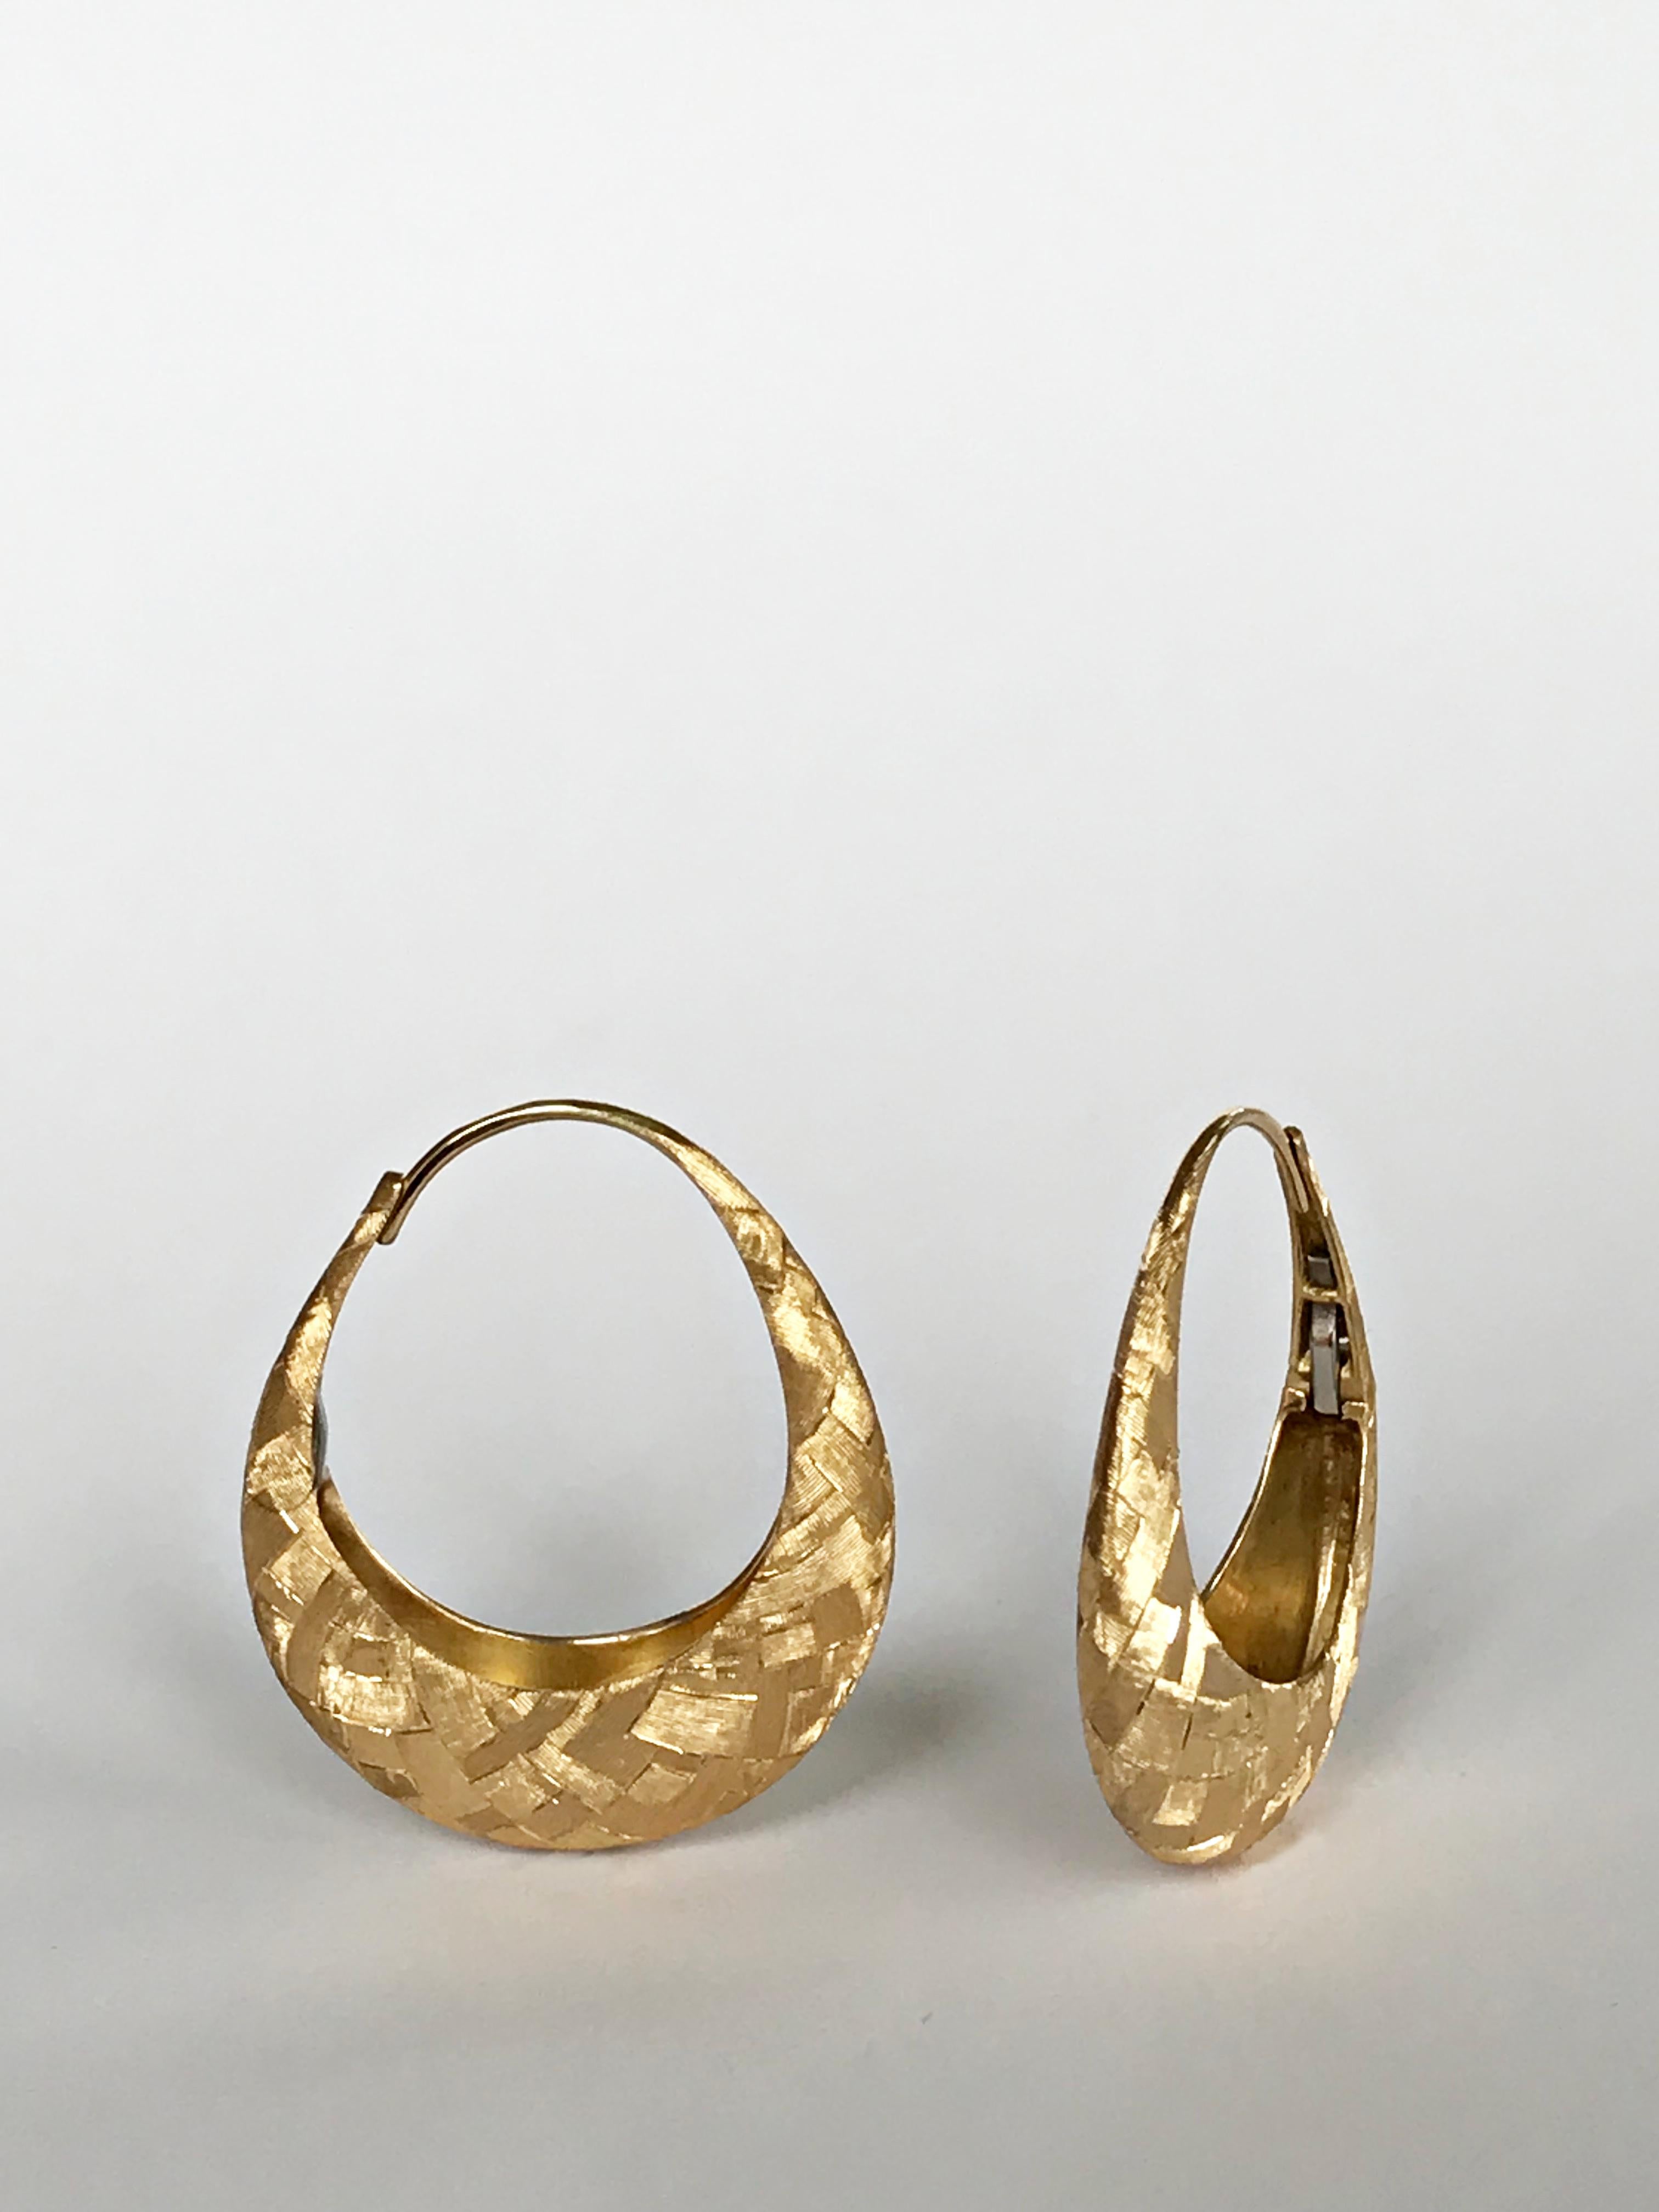 Contemporary Dalben Hand Engraved Hoop Gold Earrings For Sale